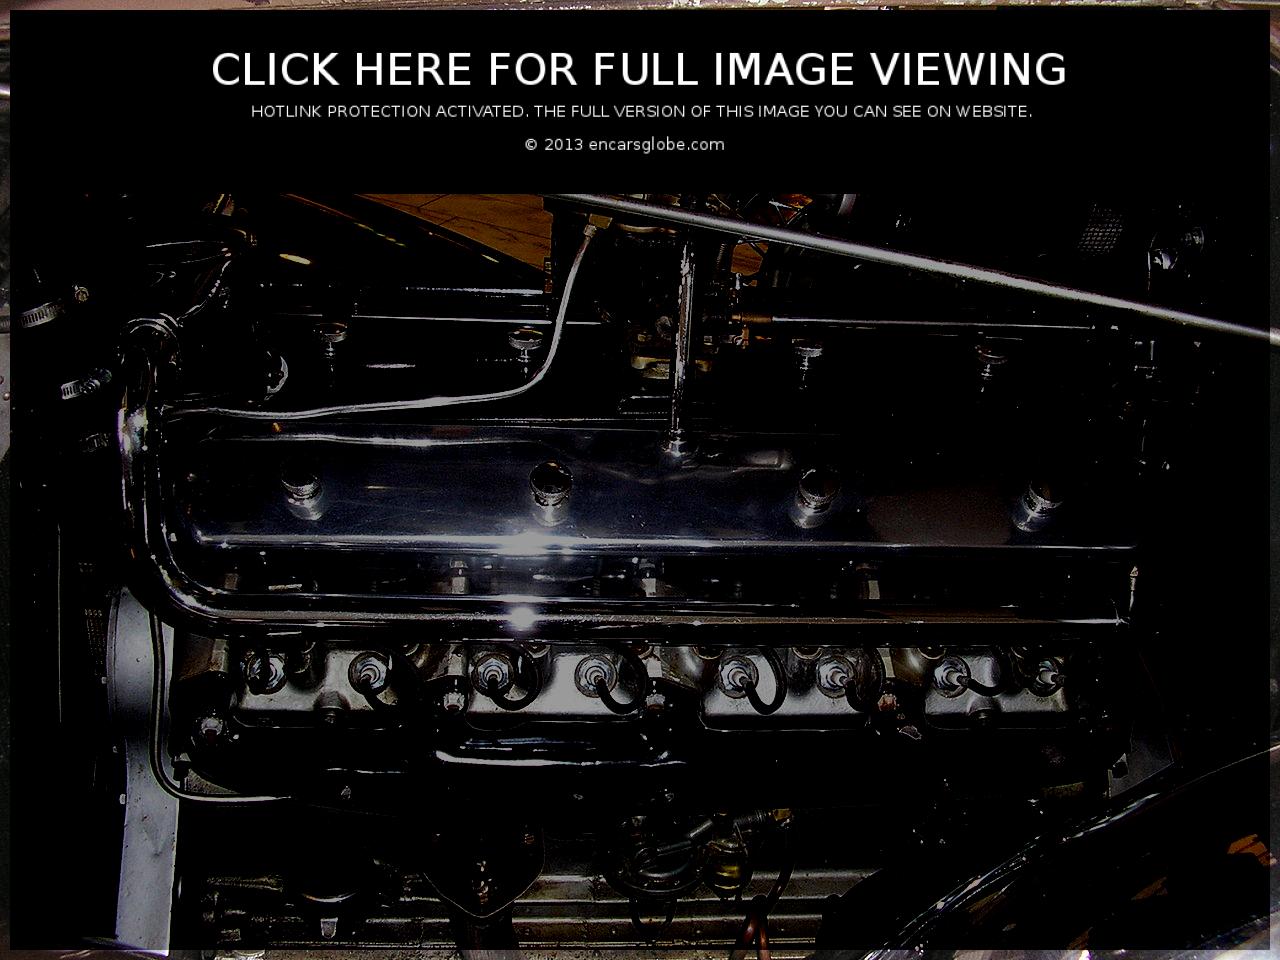 Gallery of all models of Marmon: Marmon 125 PHR, Marmon 57D ...